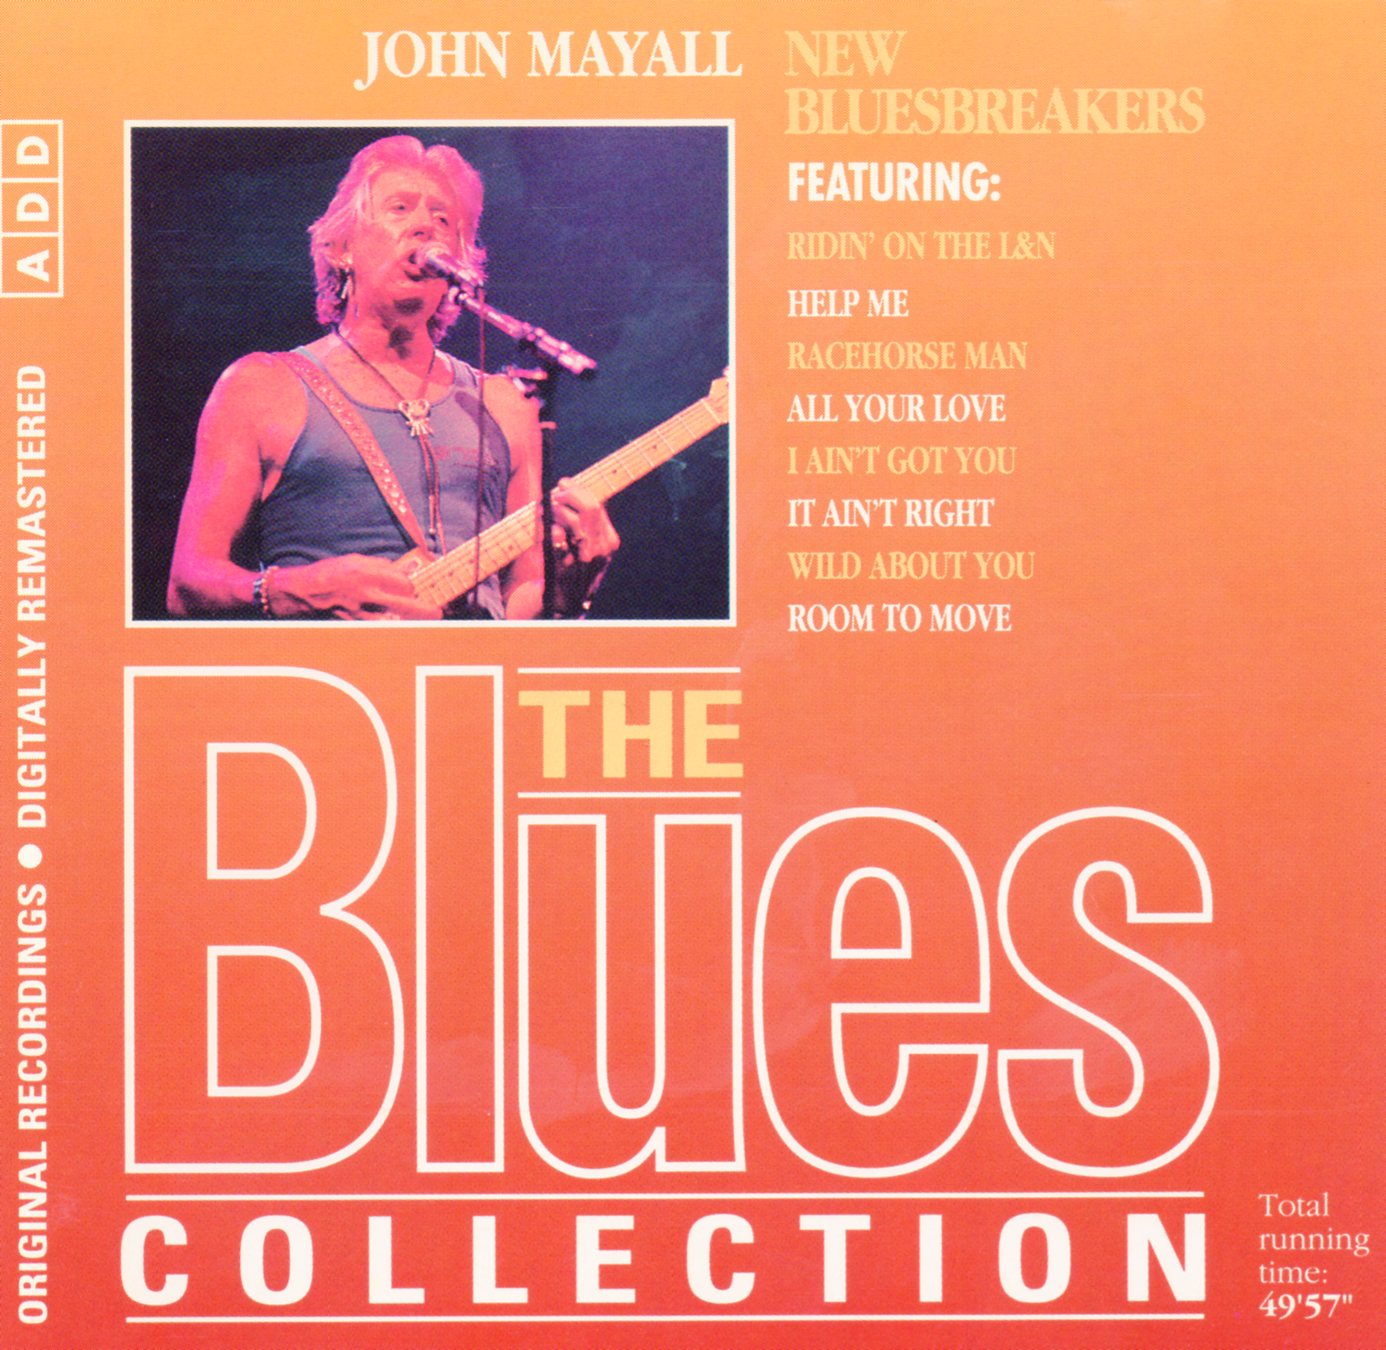 Release “The Blues Collection: John Mayall, New Bluesbreakers” by